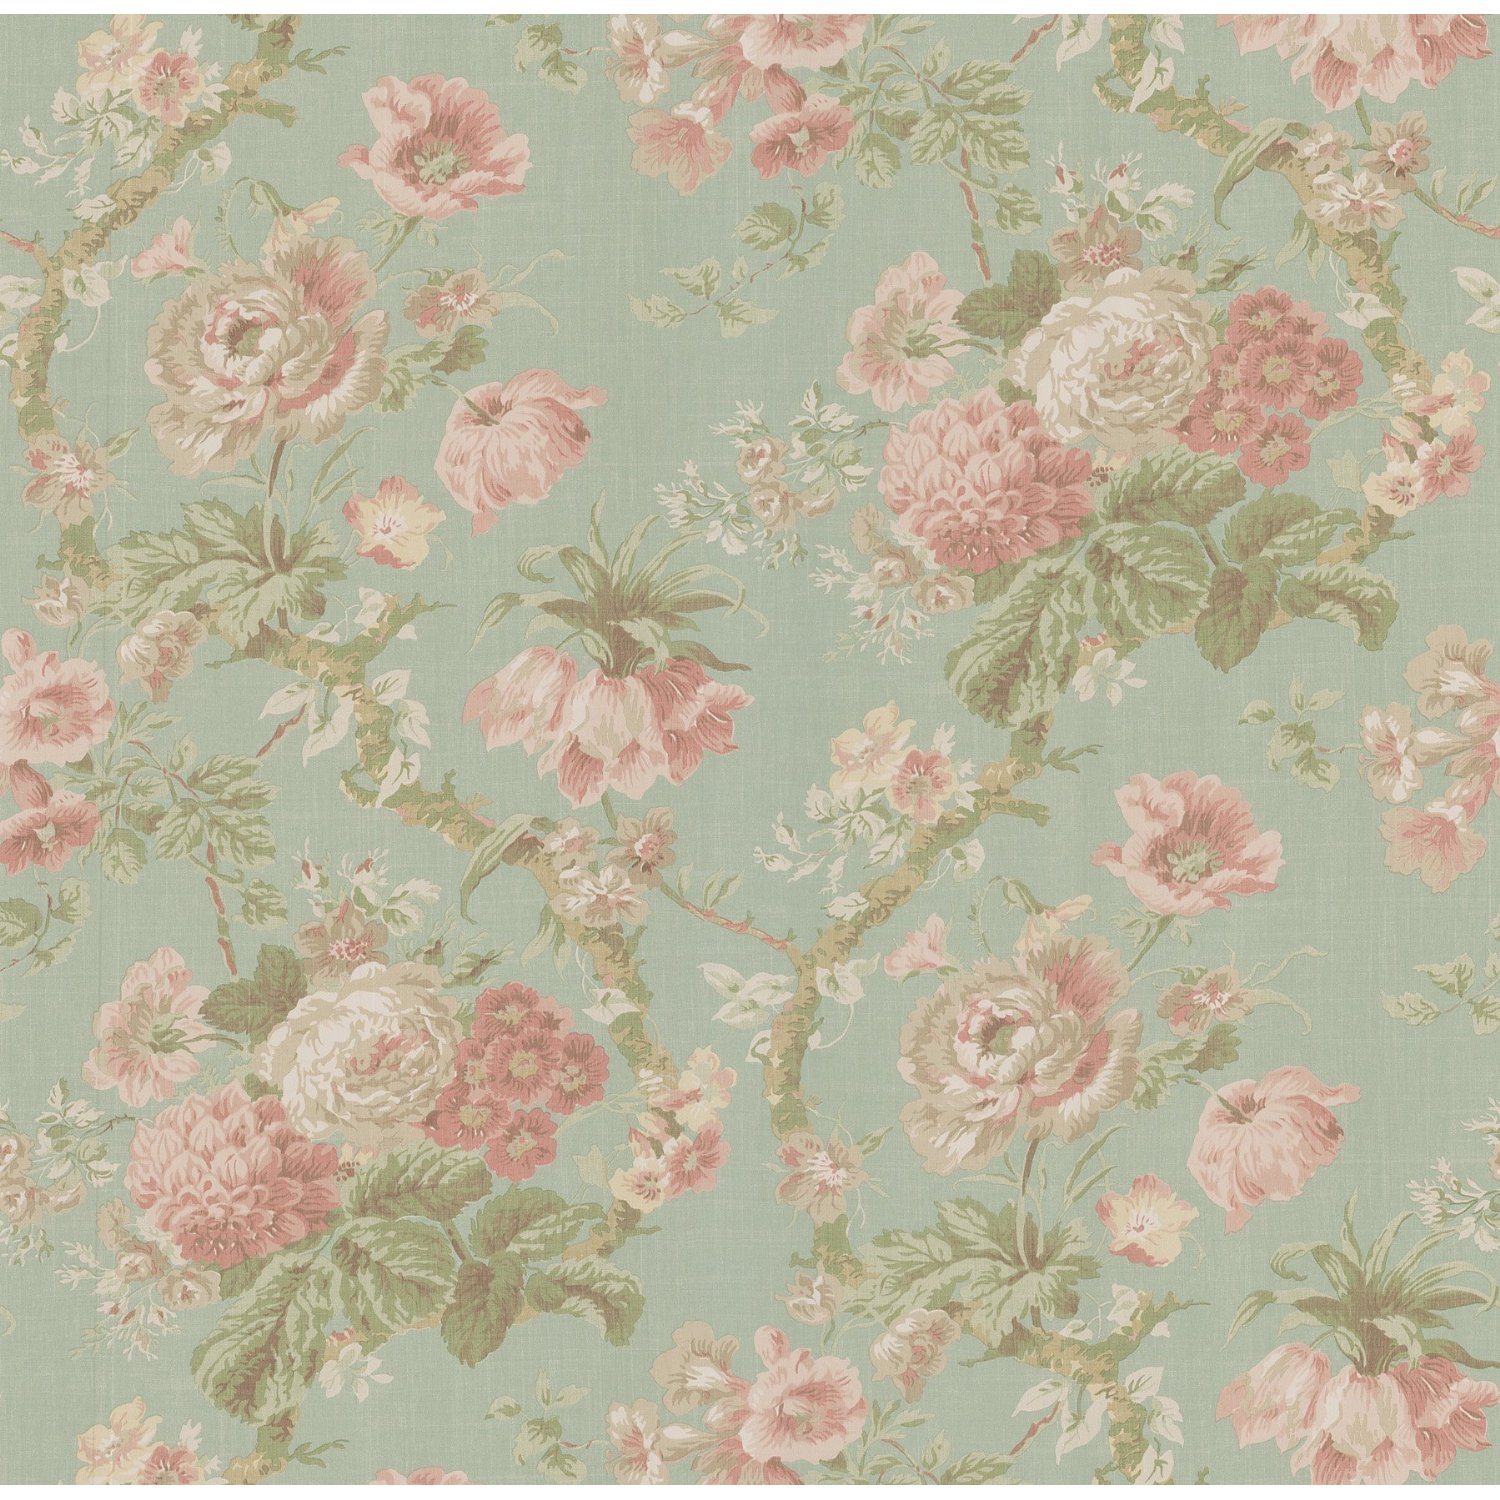 Vintage And Came Up With This Floral Wallpaper That The